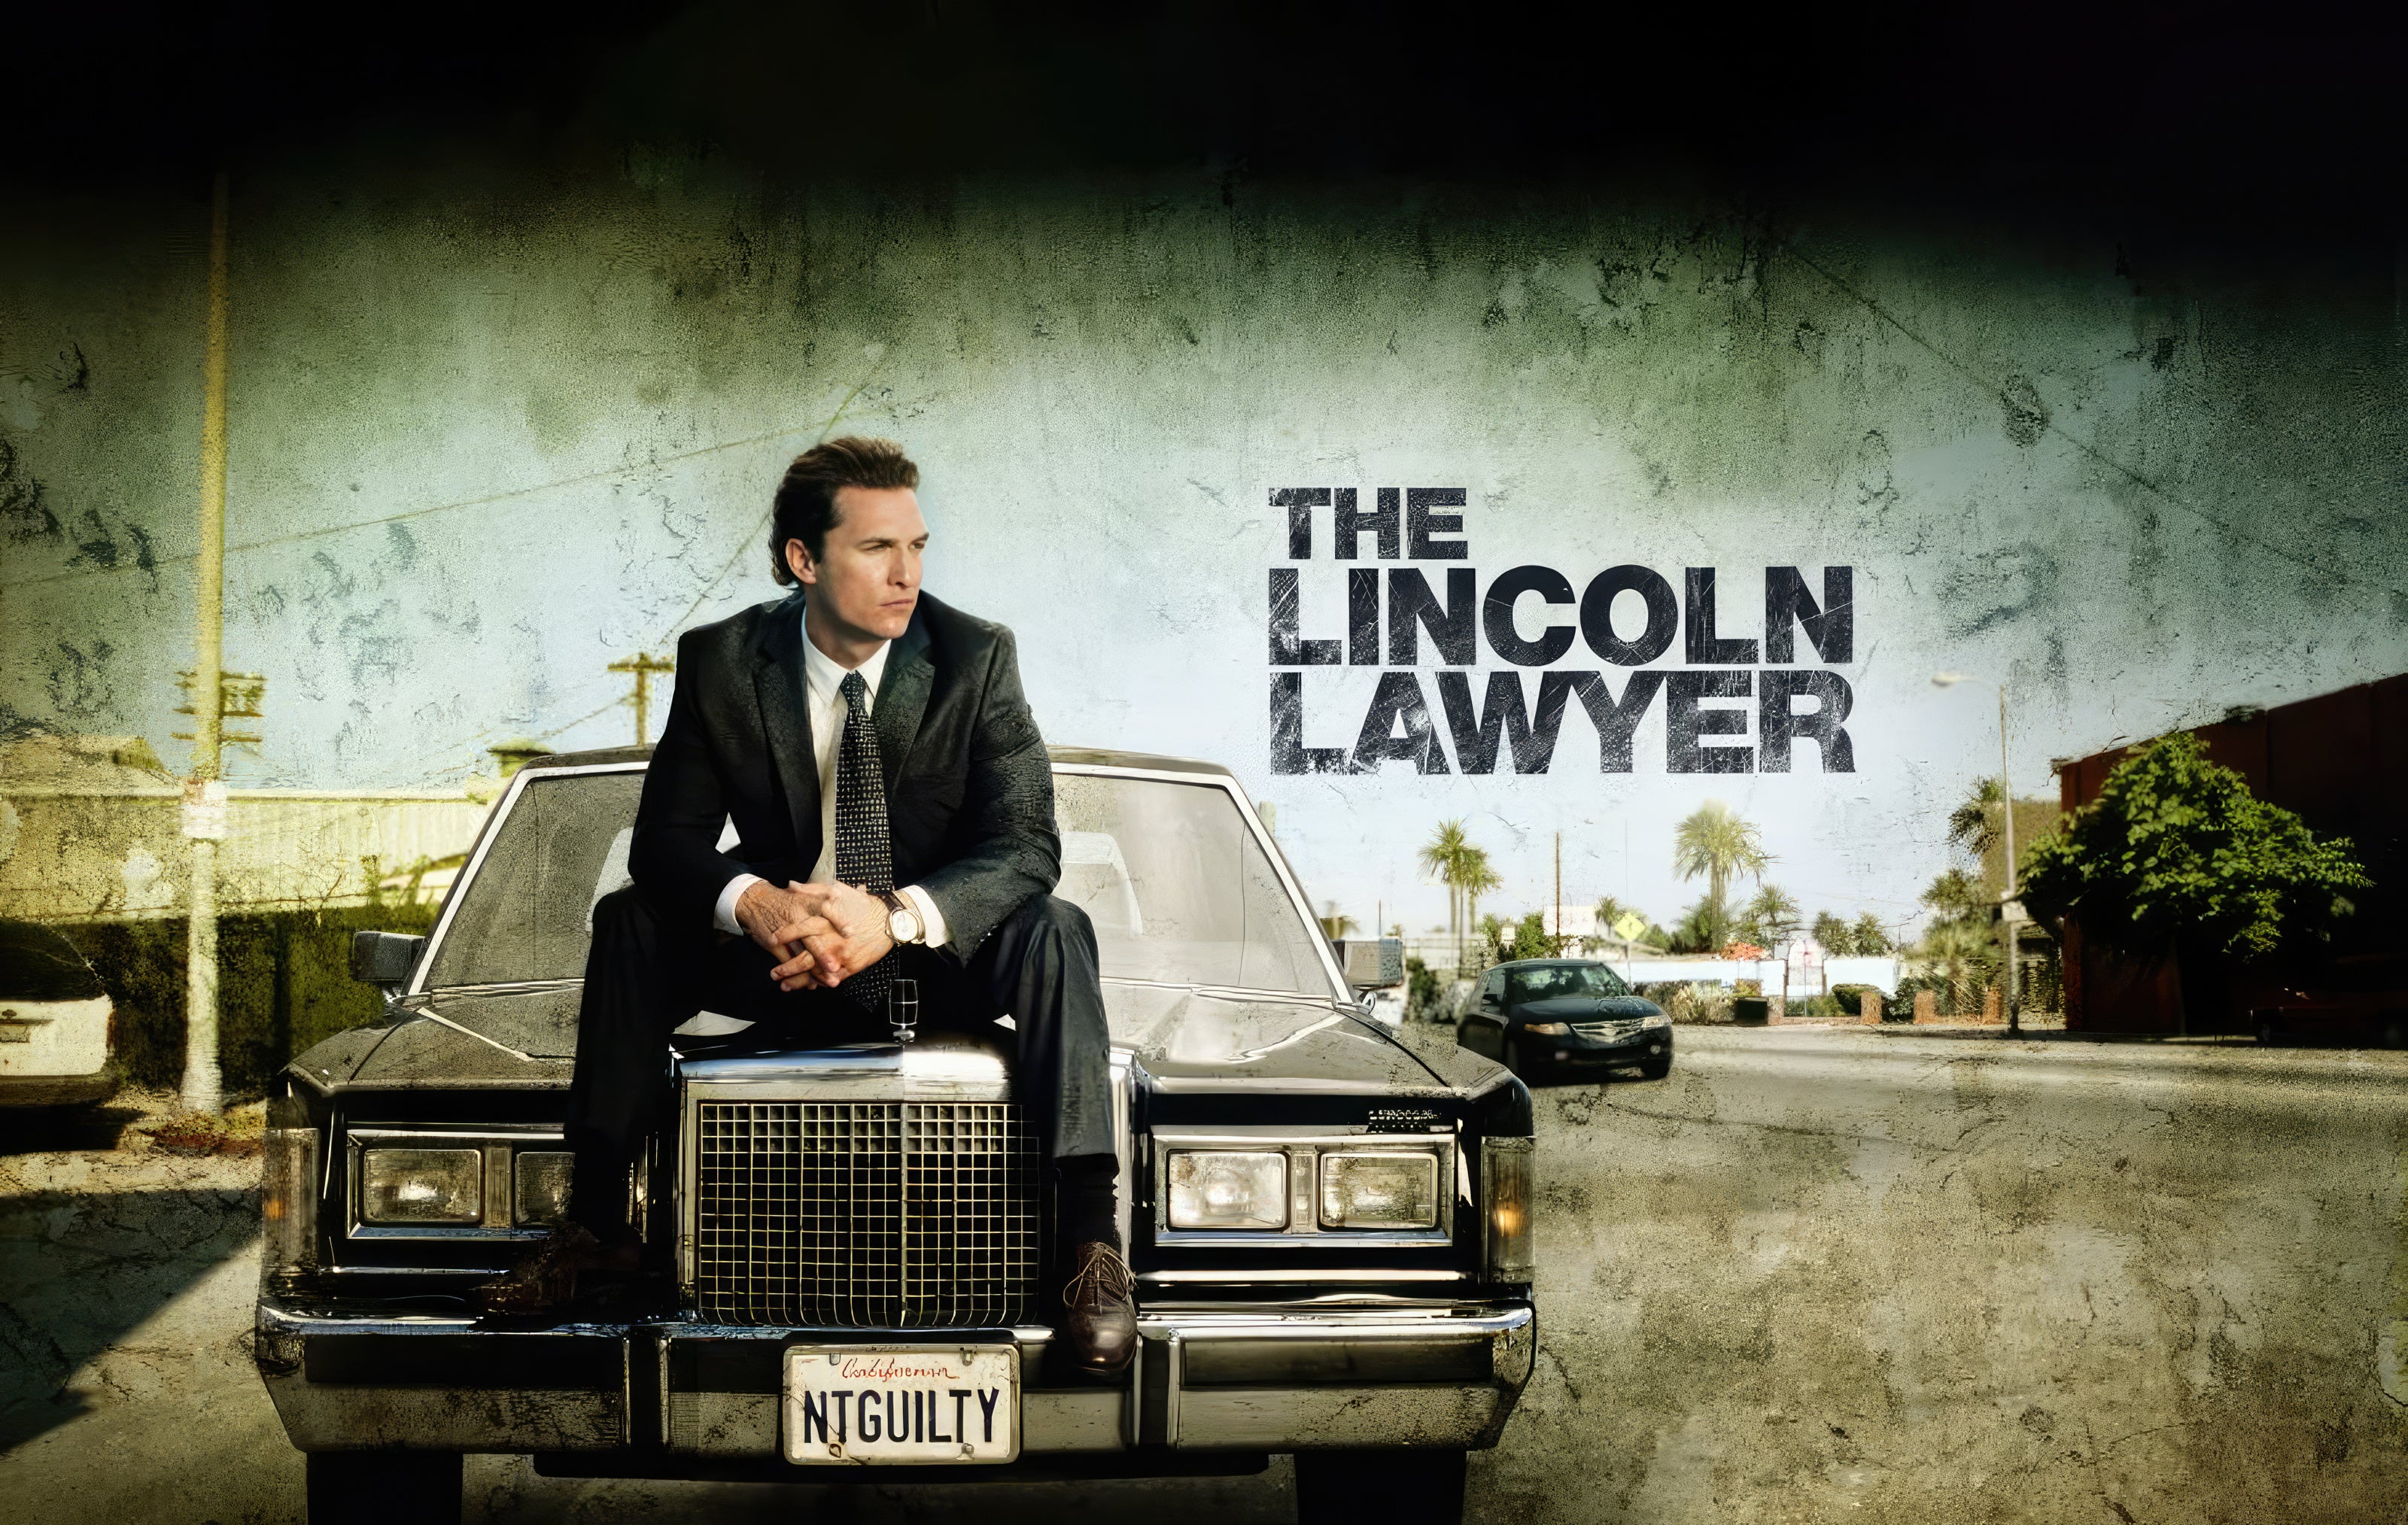 The Lincoln Lawyer Script Screenplay - Image of Movie Poster